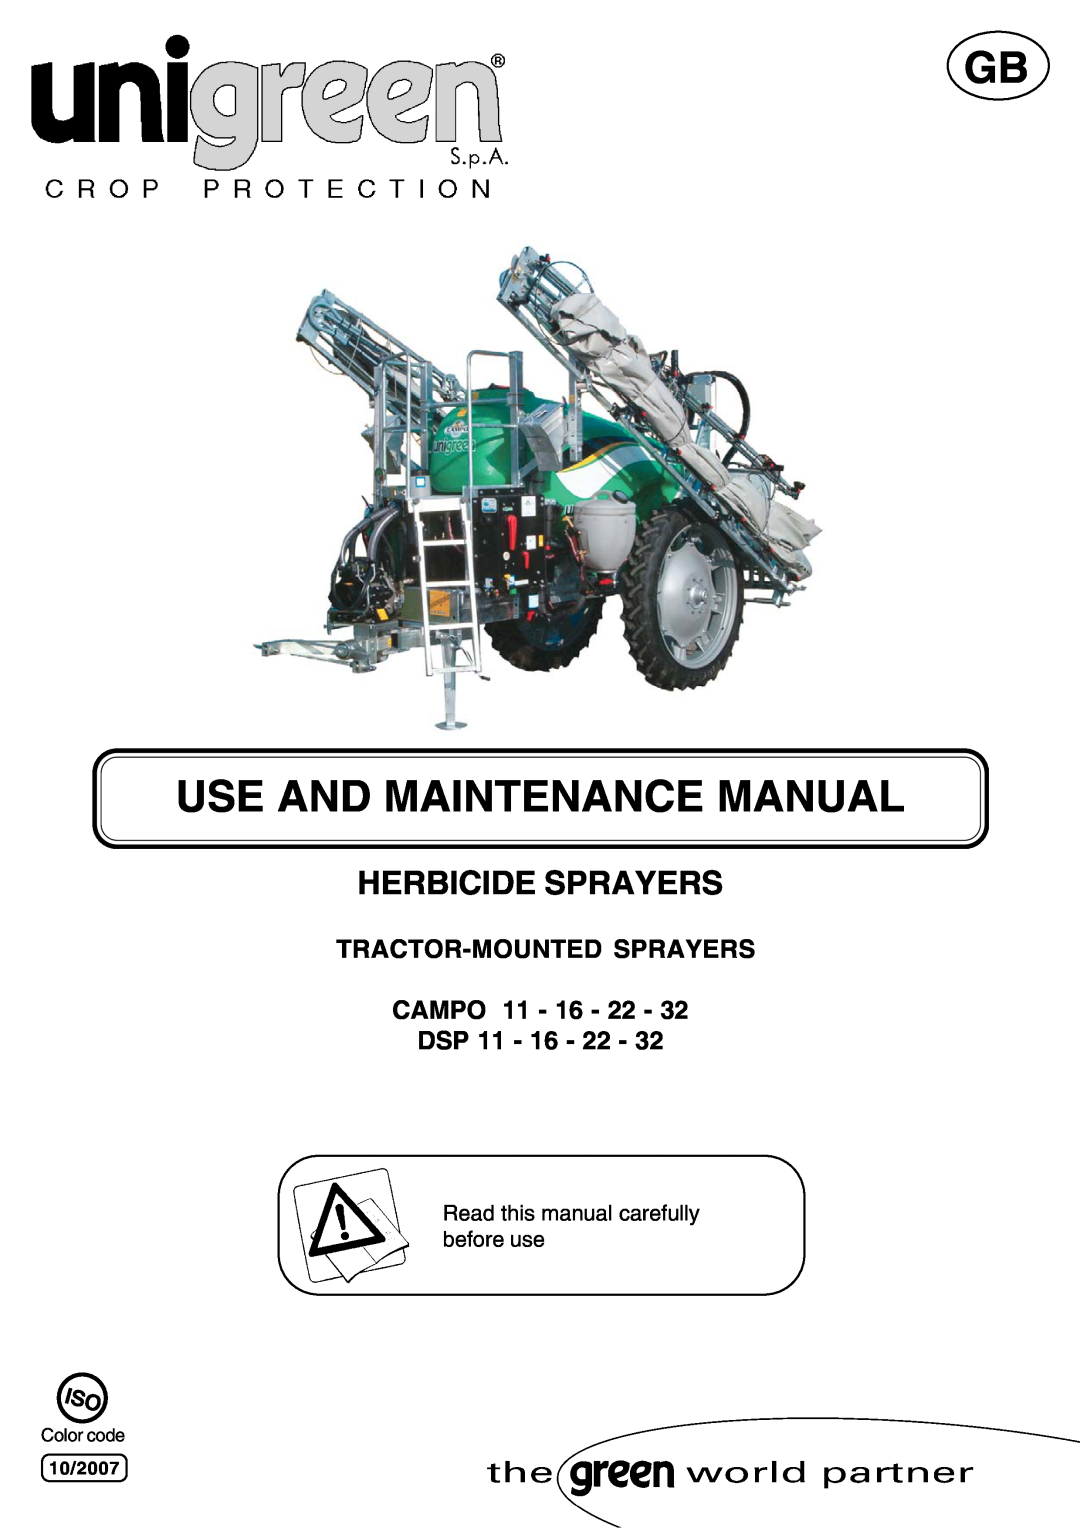 Unigreen 16, 22, 32 manual Herbicide Sprayers, Tractor-Mountedsprayers Campo, DSP 11, Read this manual carefully before use 